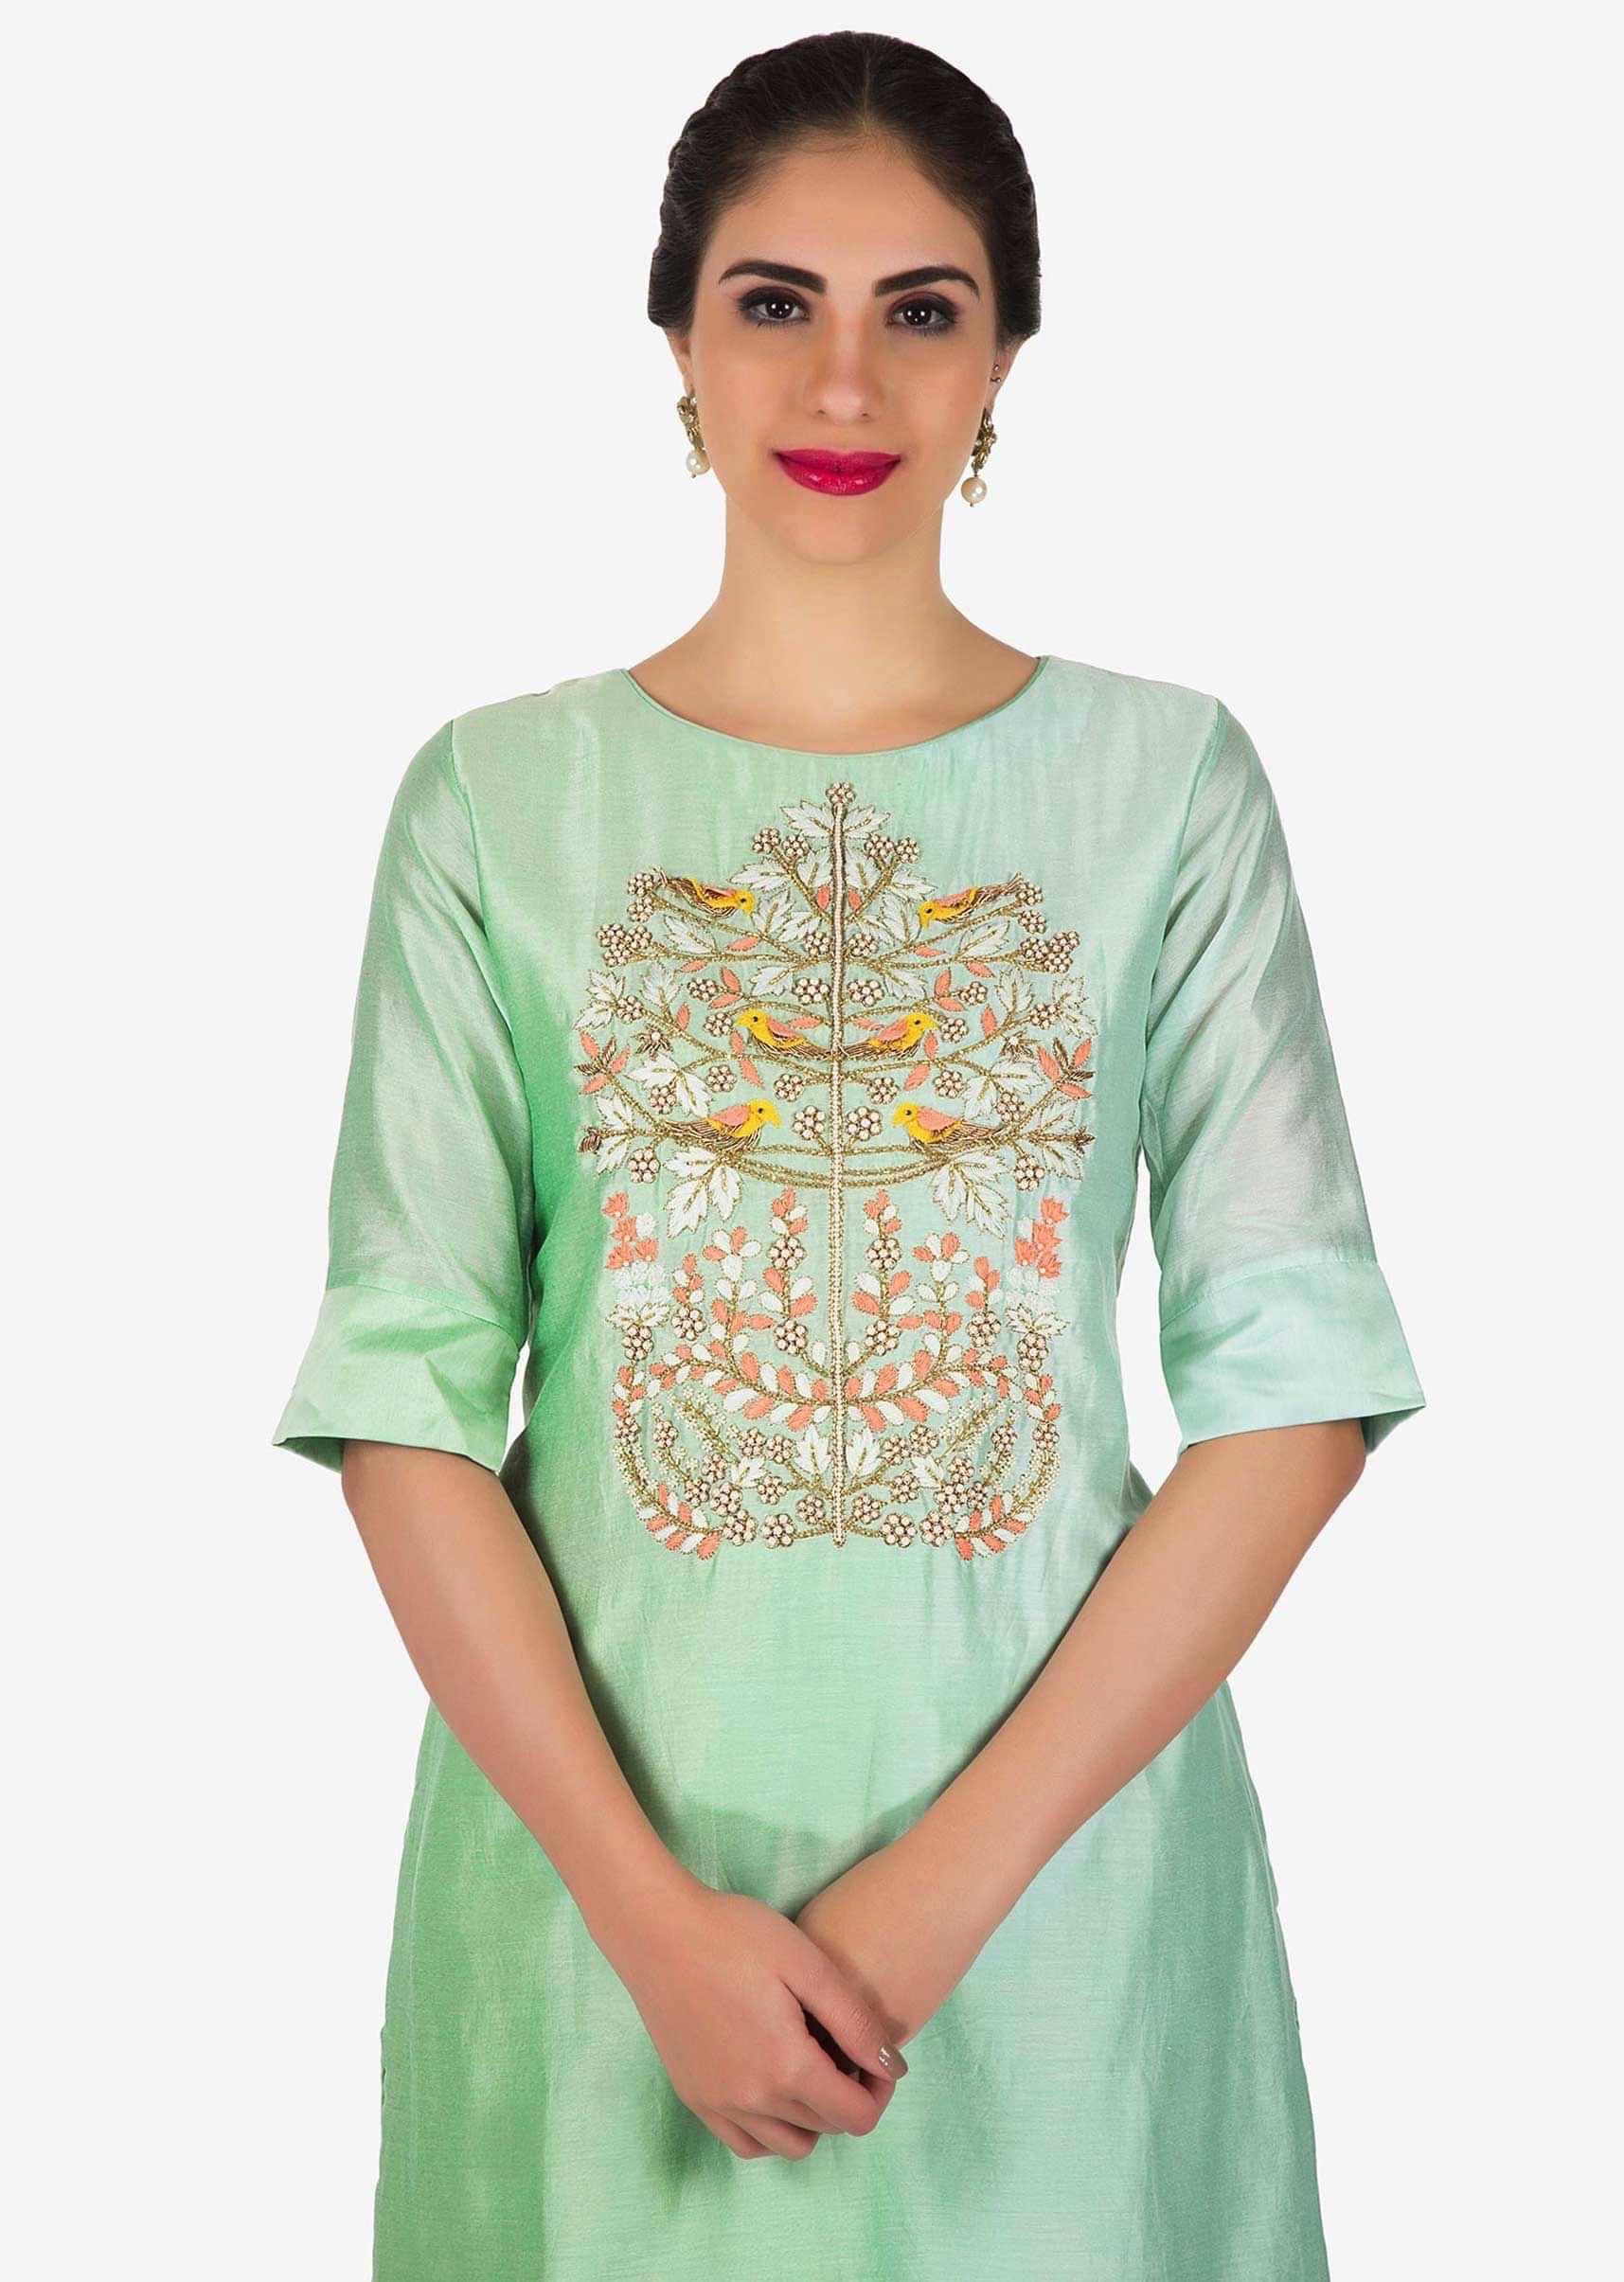 Apple Green Shaded Straight Suit In Art Silk With Moti And Zardosi Embroidery Online - Kalki Fashion